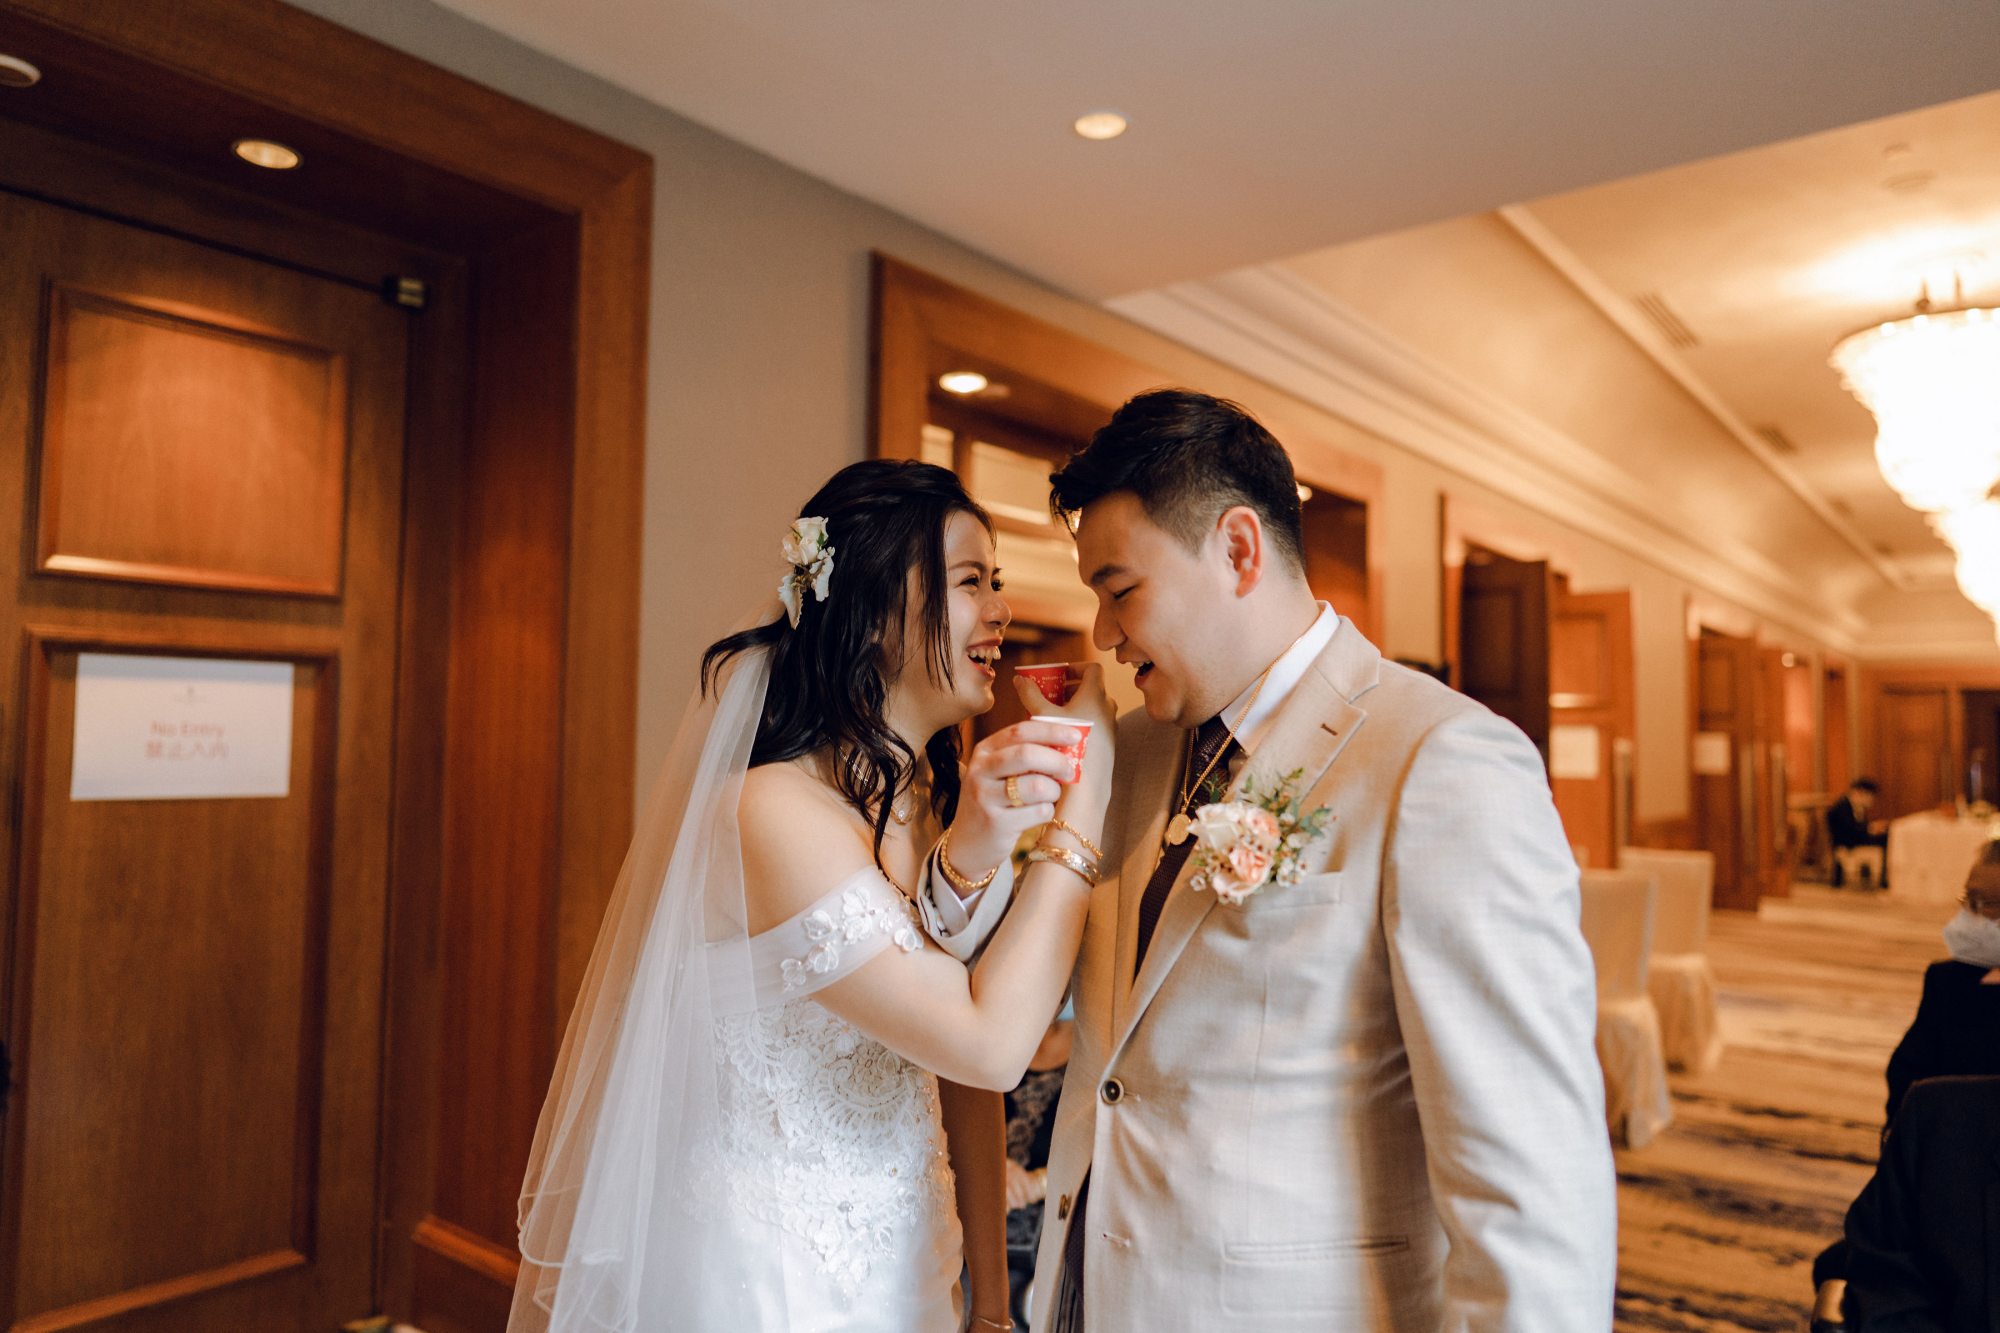 B & J Wedding Day Lunch Photography Coverage At St Regis Hotel by Sam on OneThreeOneFour 31